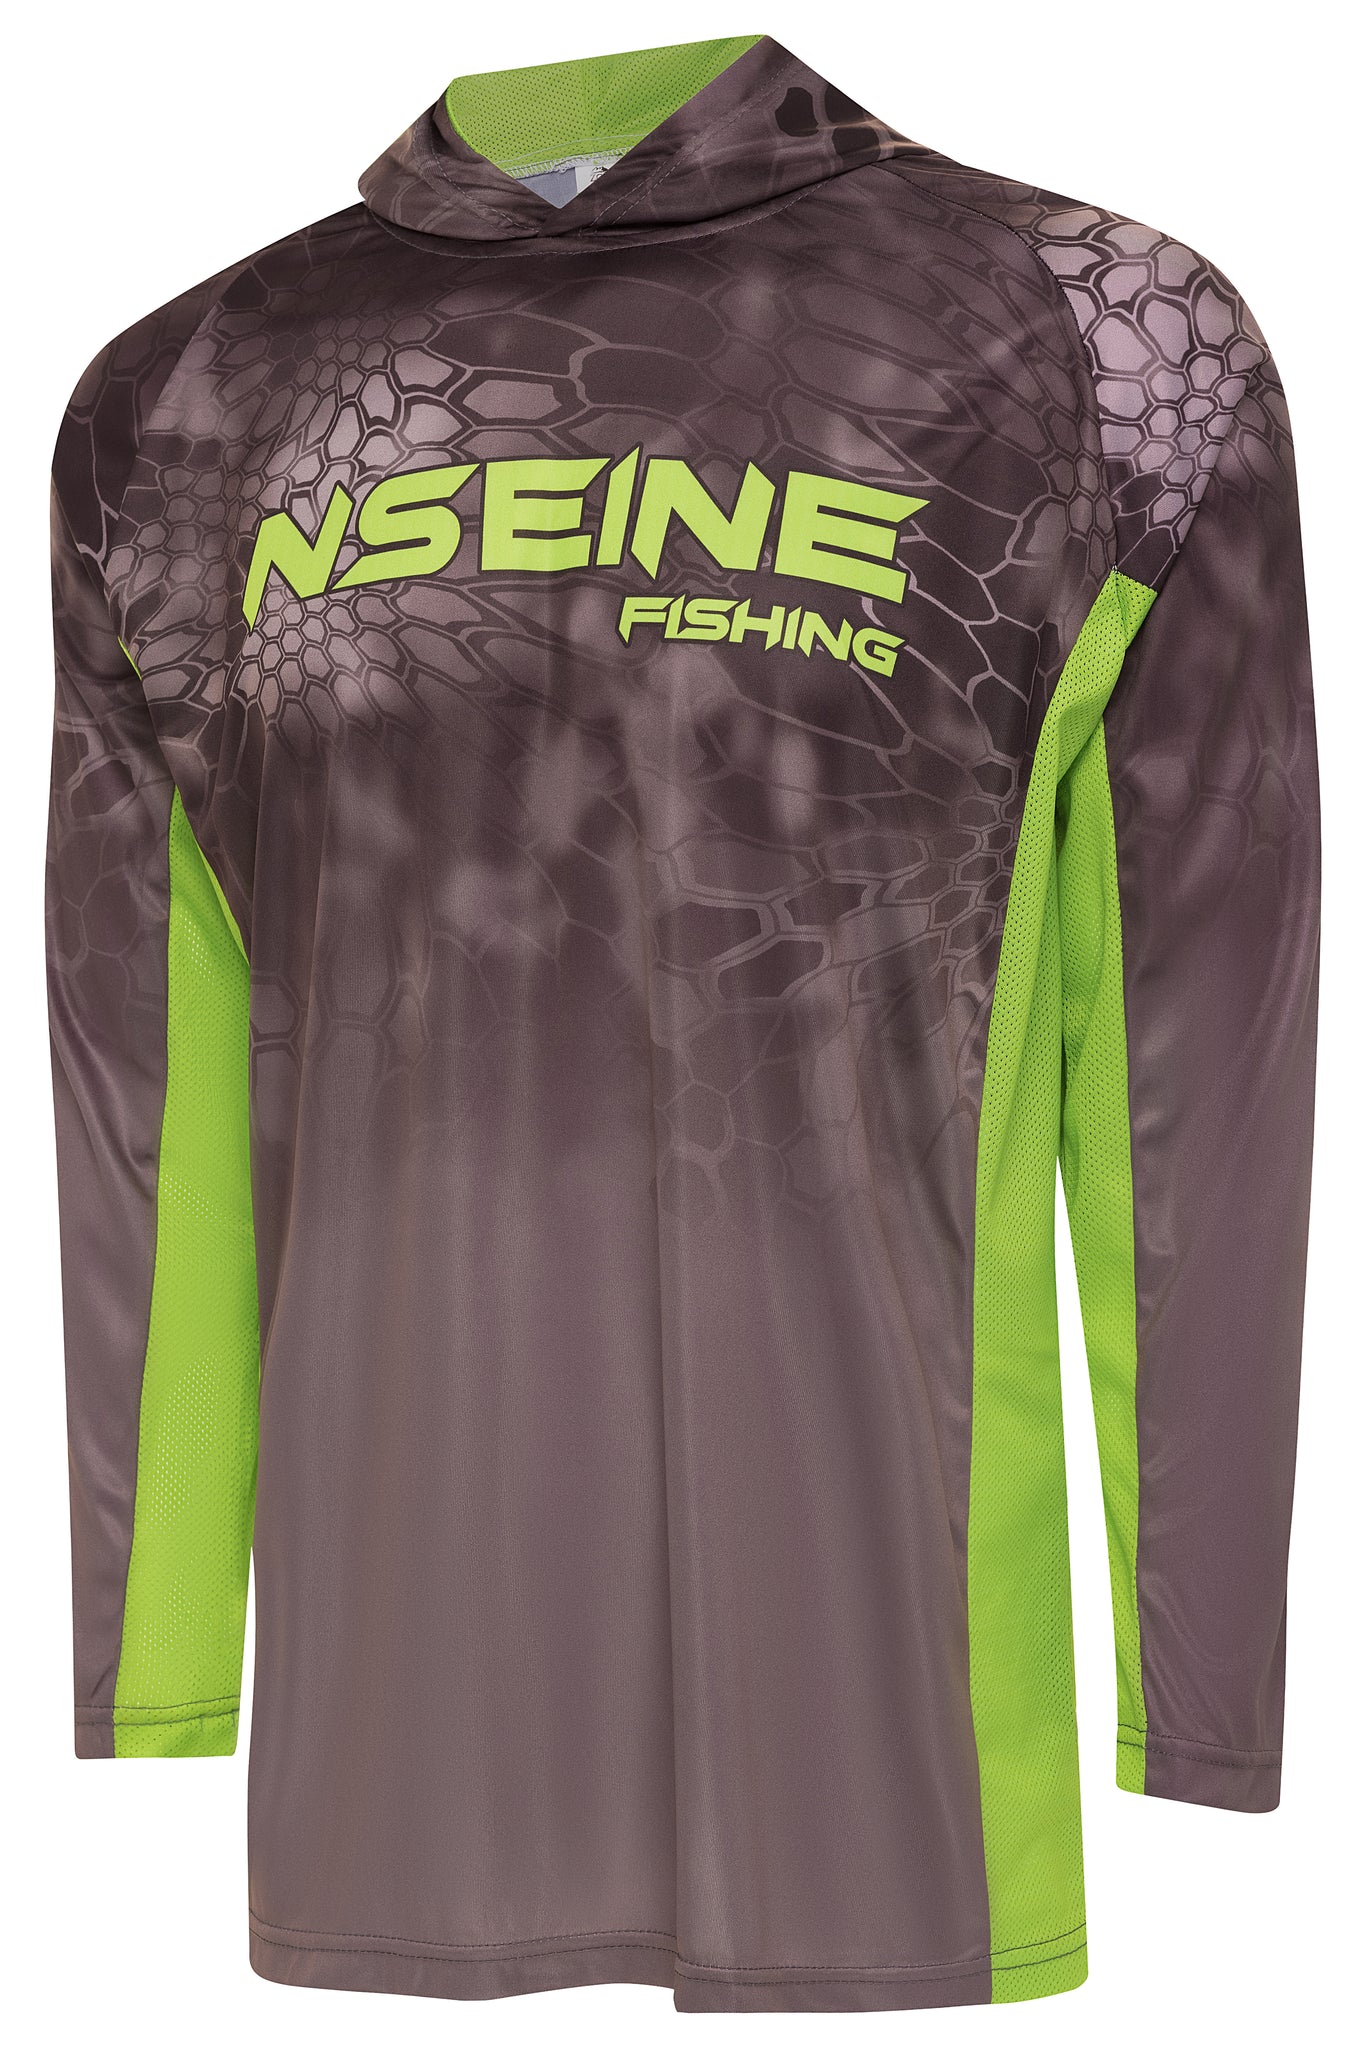 NSEINE Gray/Green Vented/Hooded Long Sleeve Fishing Shirt – ZillaGear  Outdoor